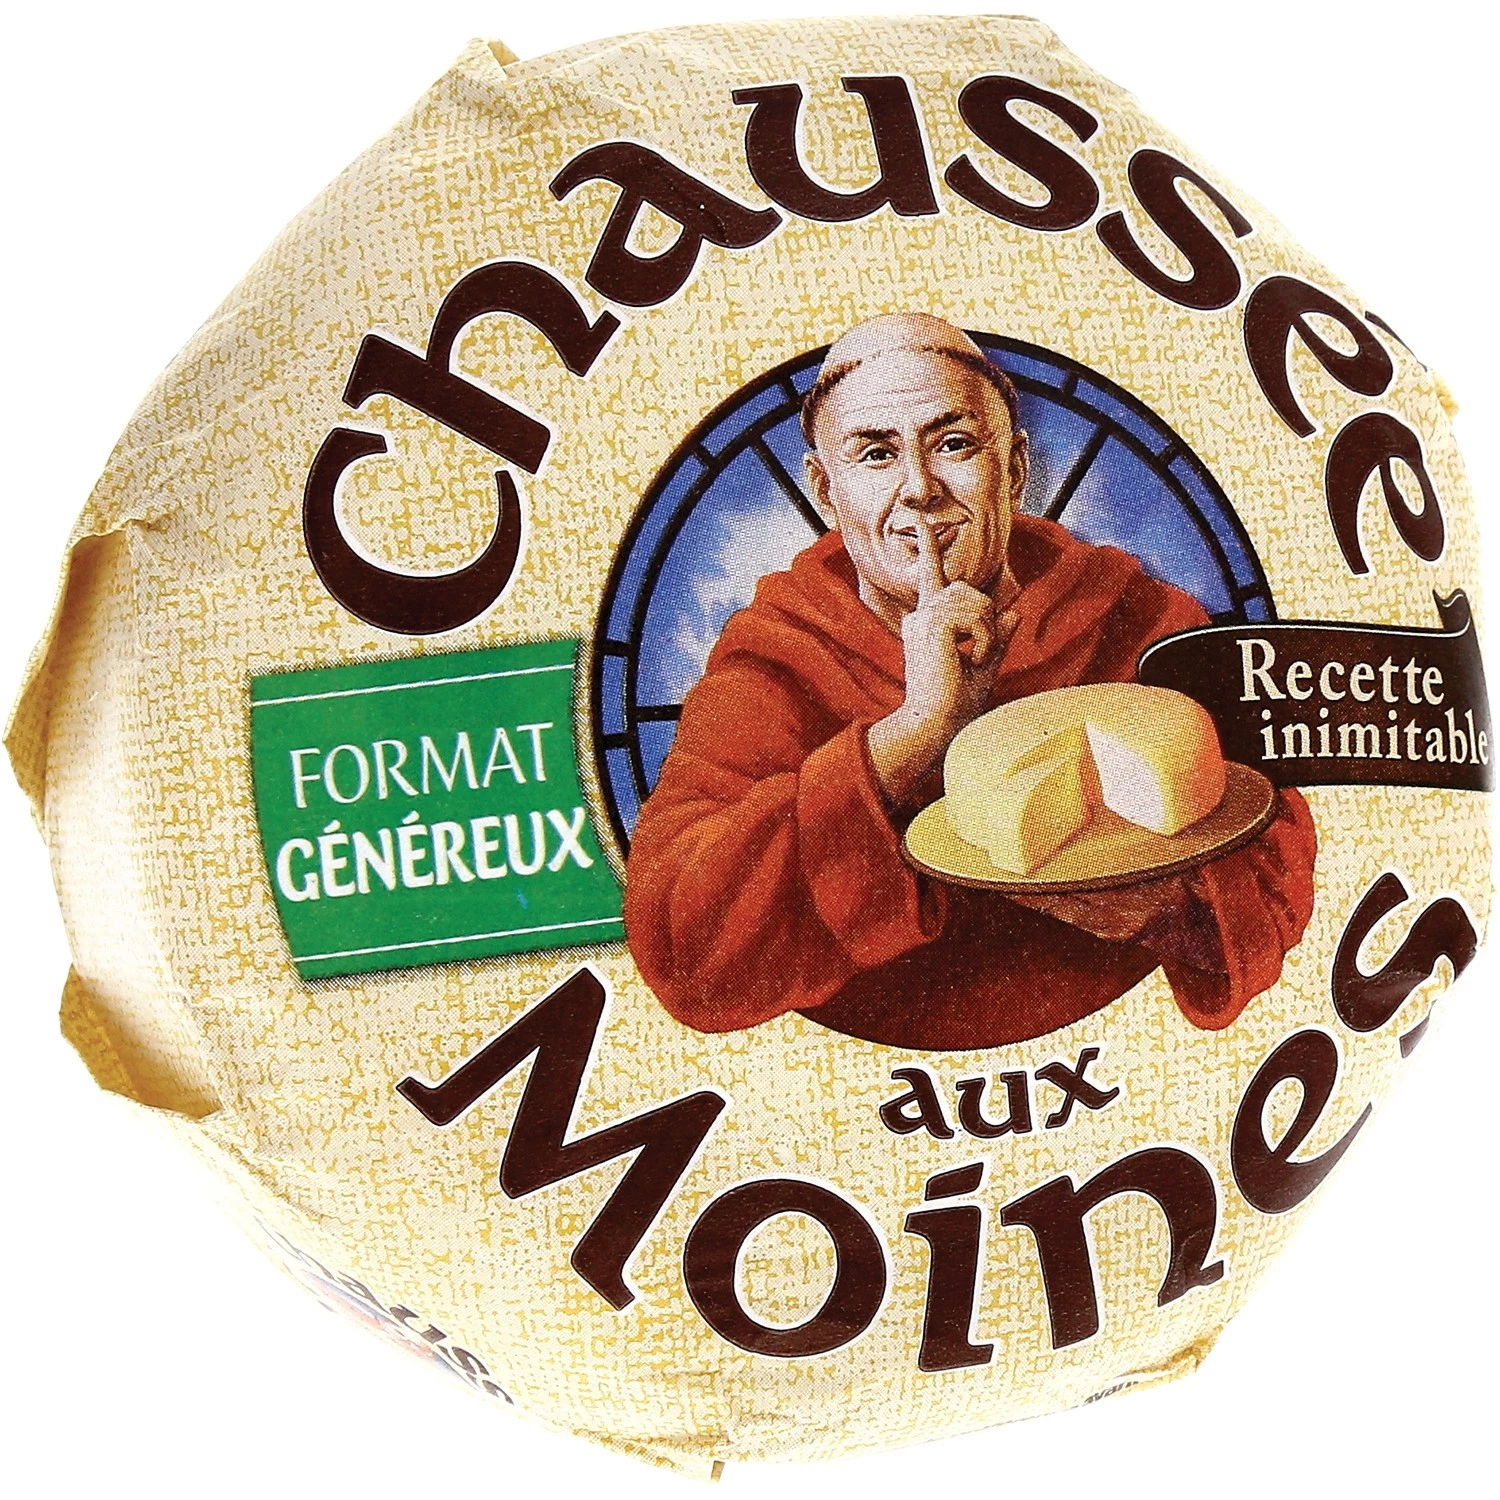 Chaussee aux moines family size 450g